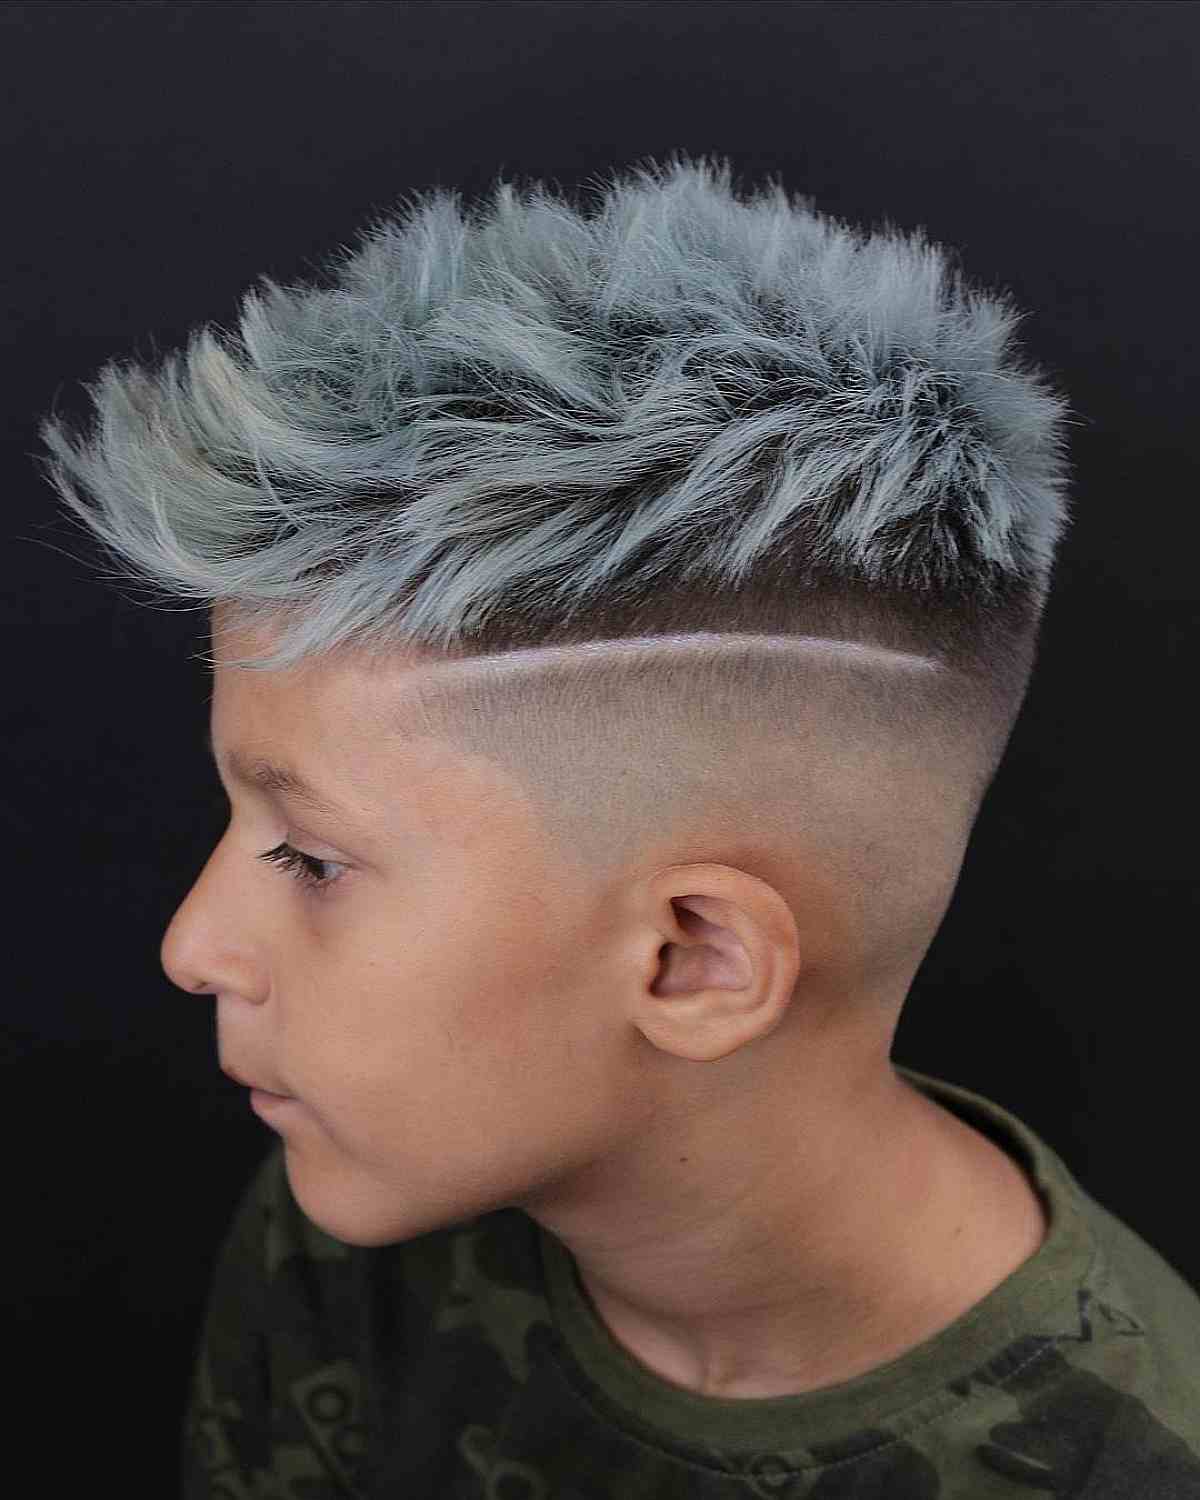 Skin Fade with Frosted Tips and Designs for Little Boys